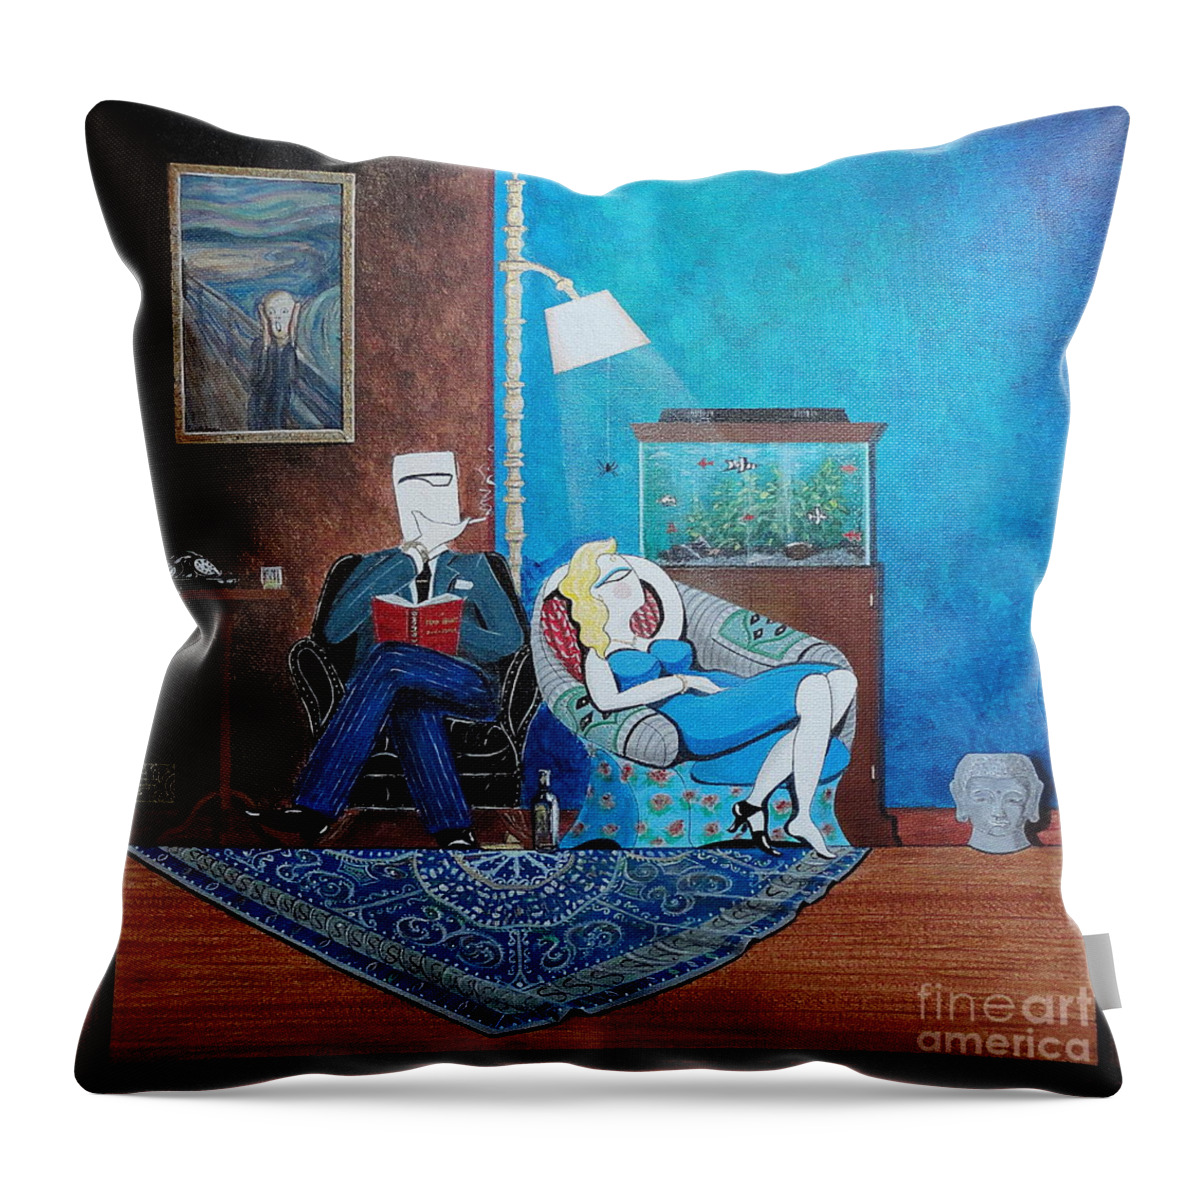 Johnlyes Throw Pillow featuring the painting Psychiatrist Sitting in Chair Studying Spider's Reaction by John Lyes